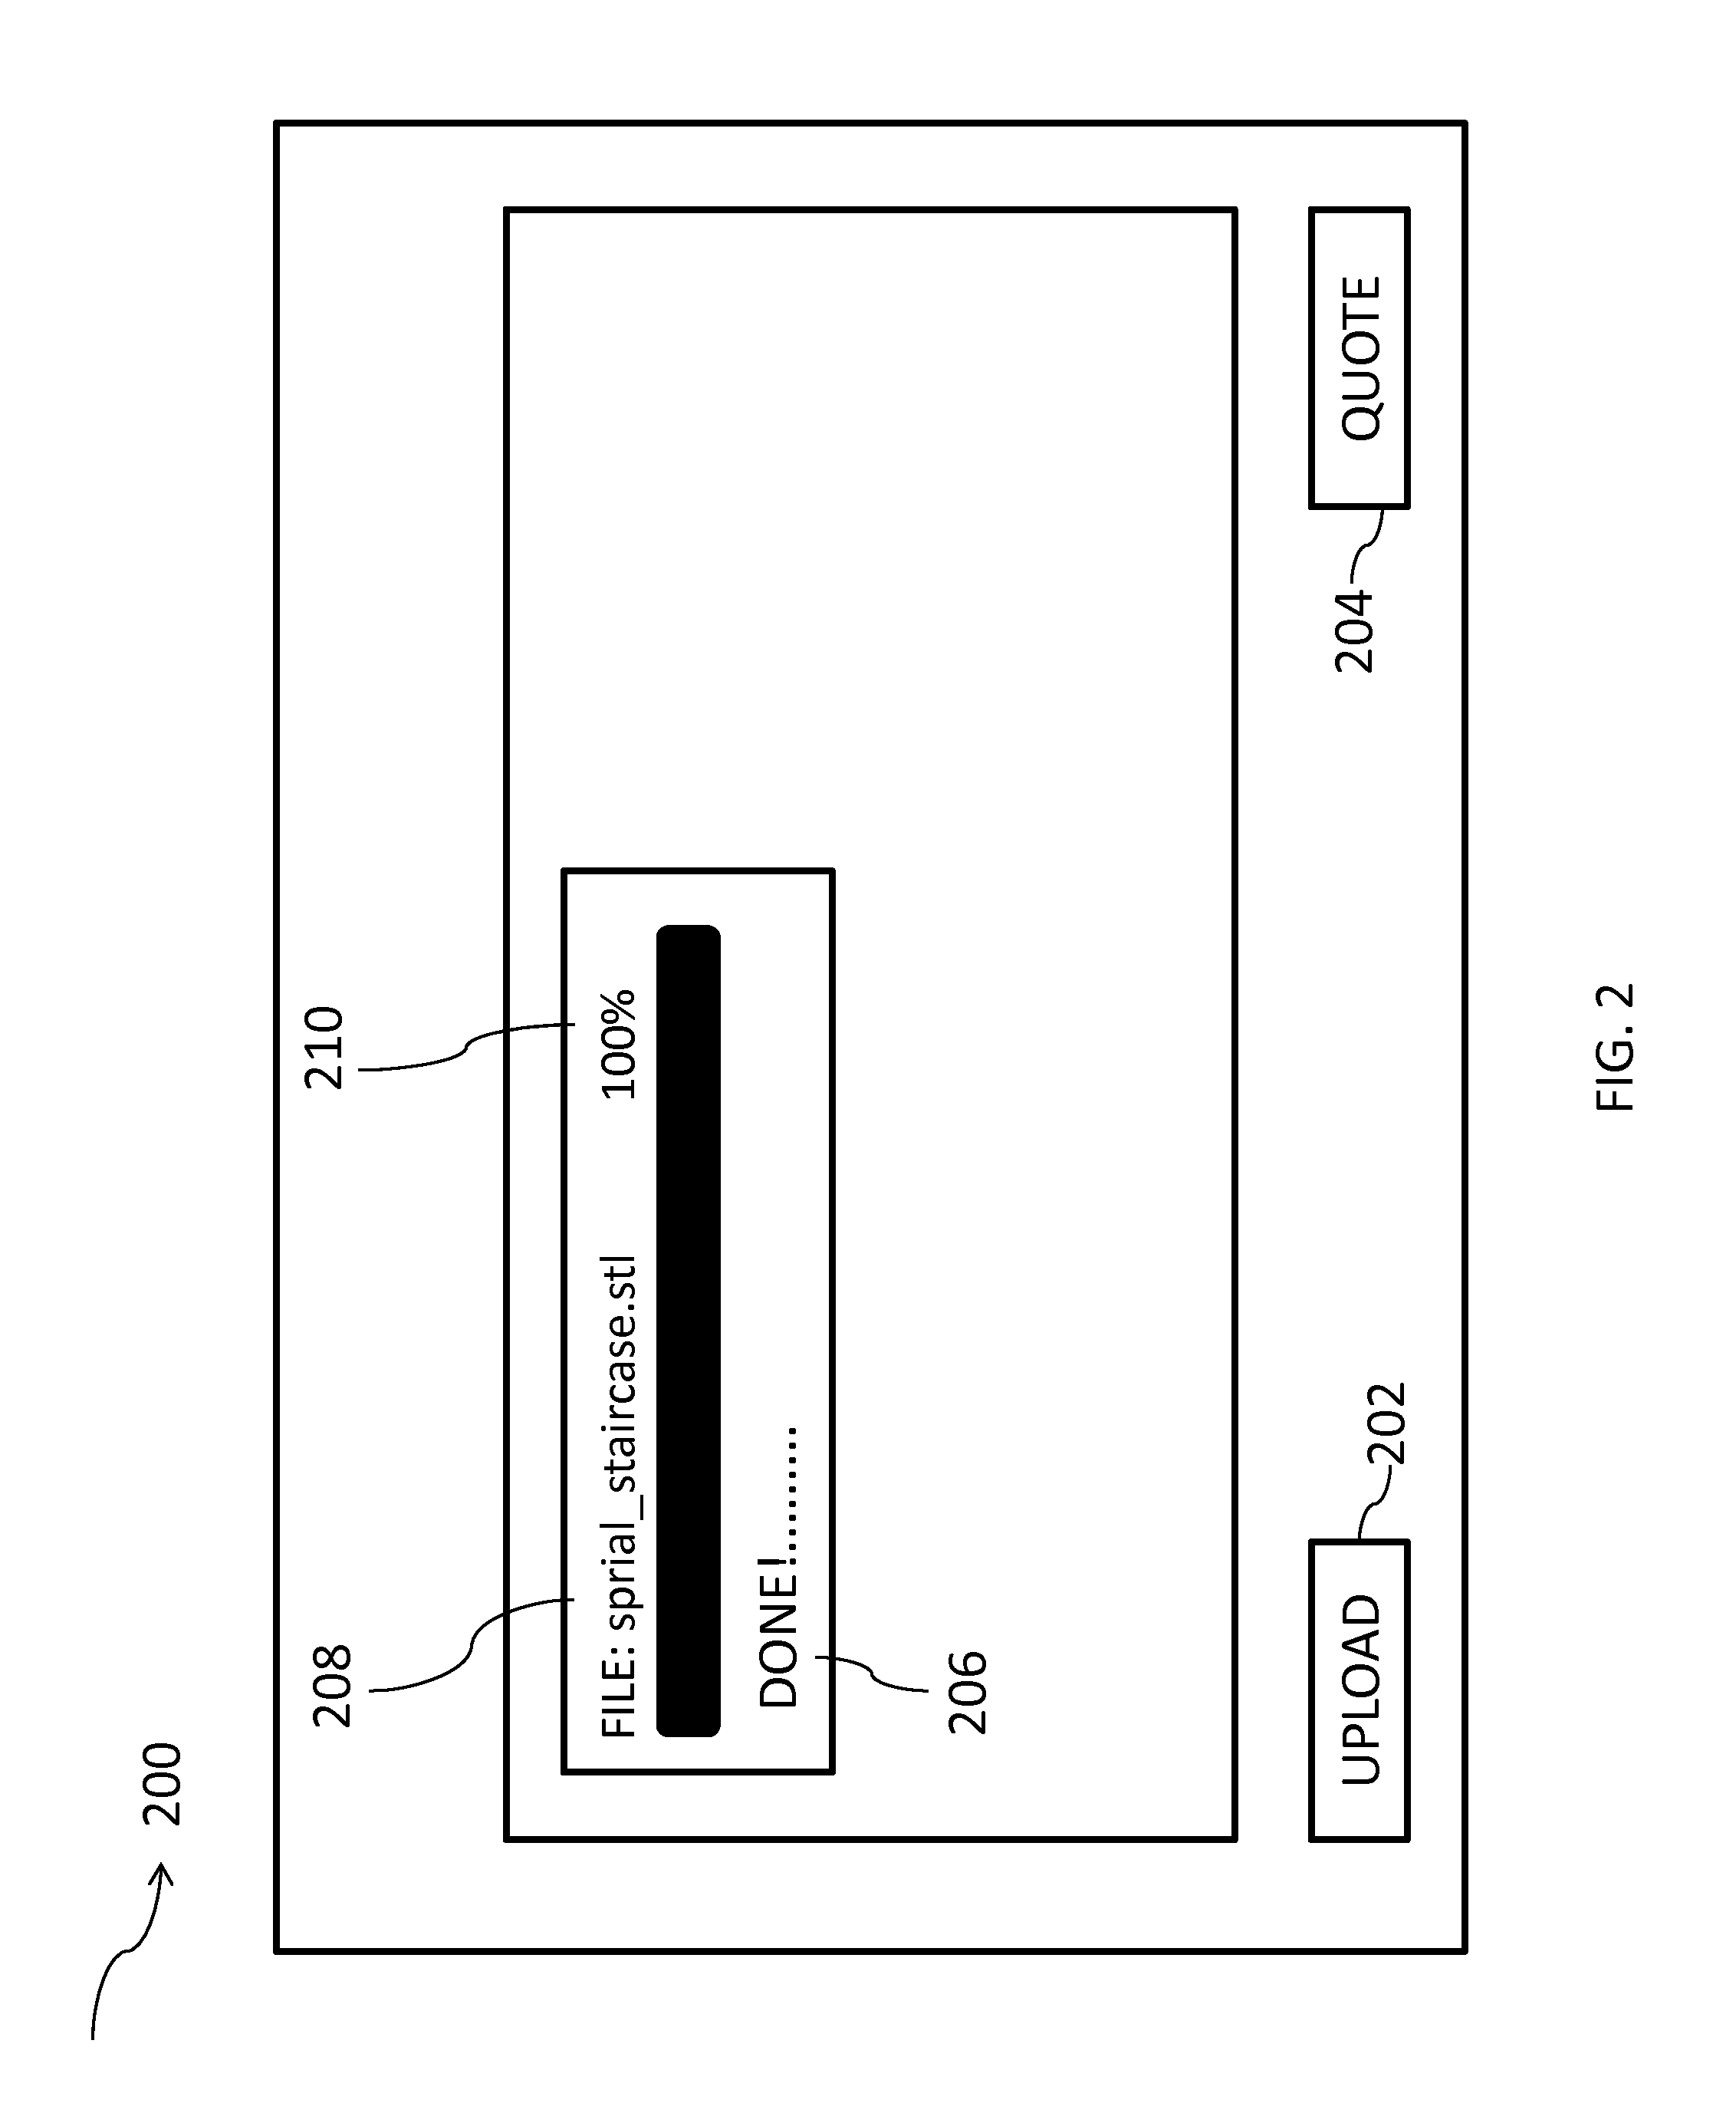 Systems and methods for providing price quotes for 3D objects